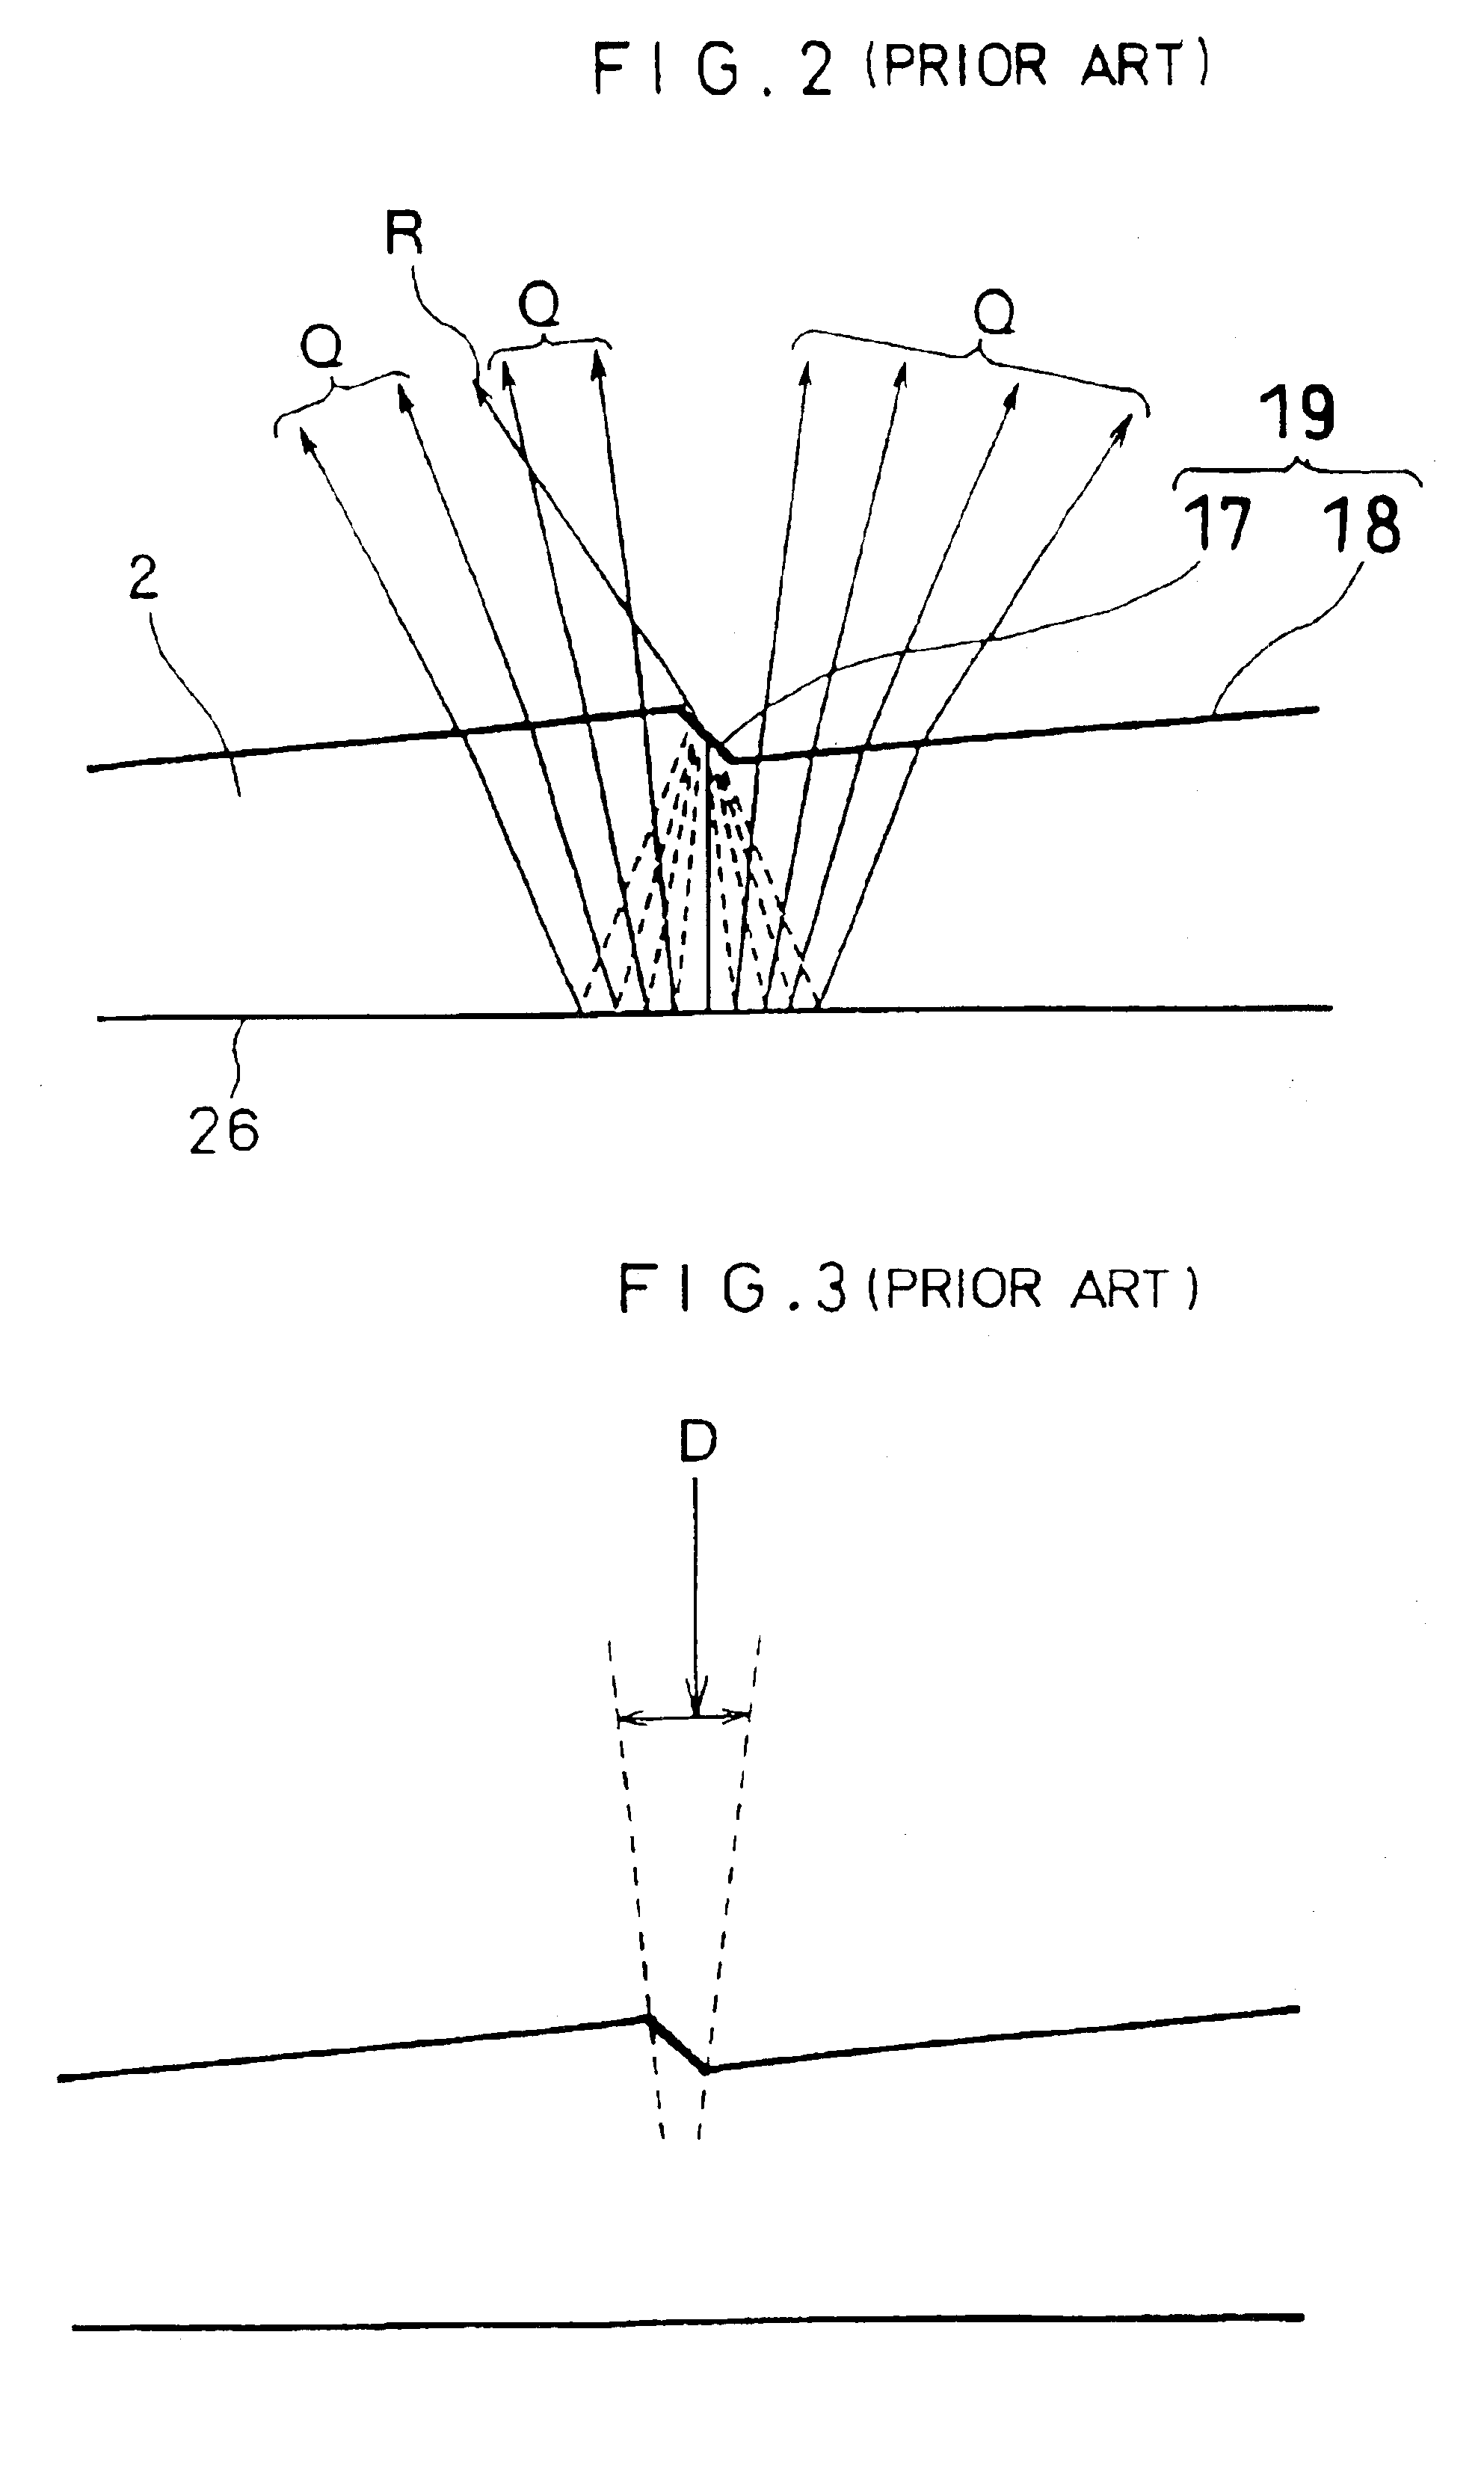 Spread illuminating apparatus with means for reflecting light dispersely